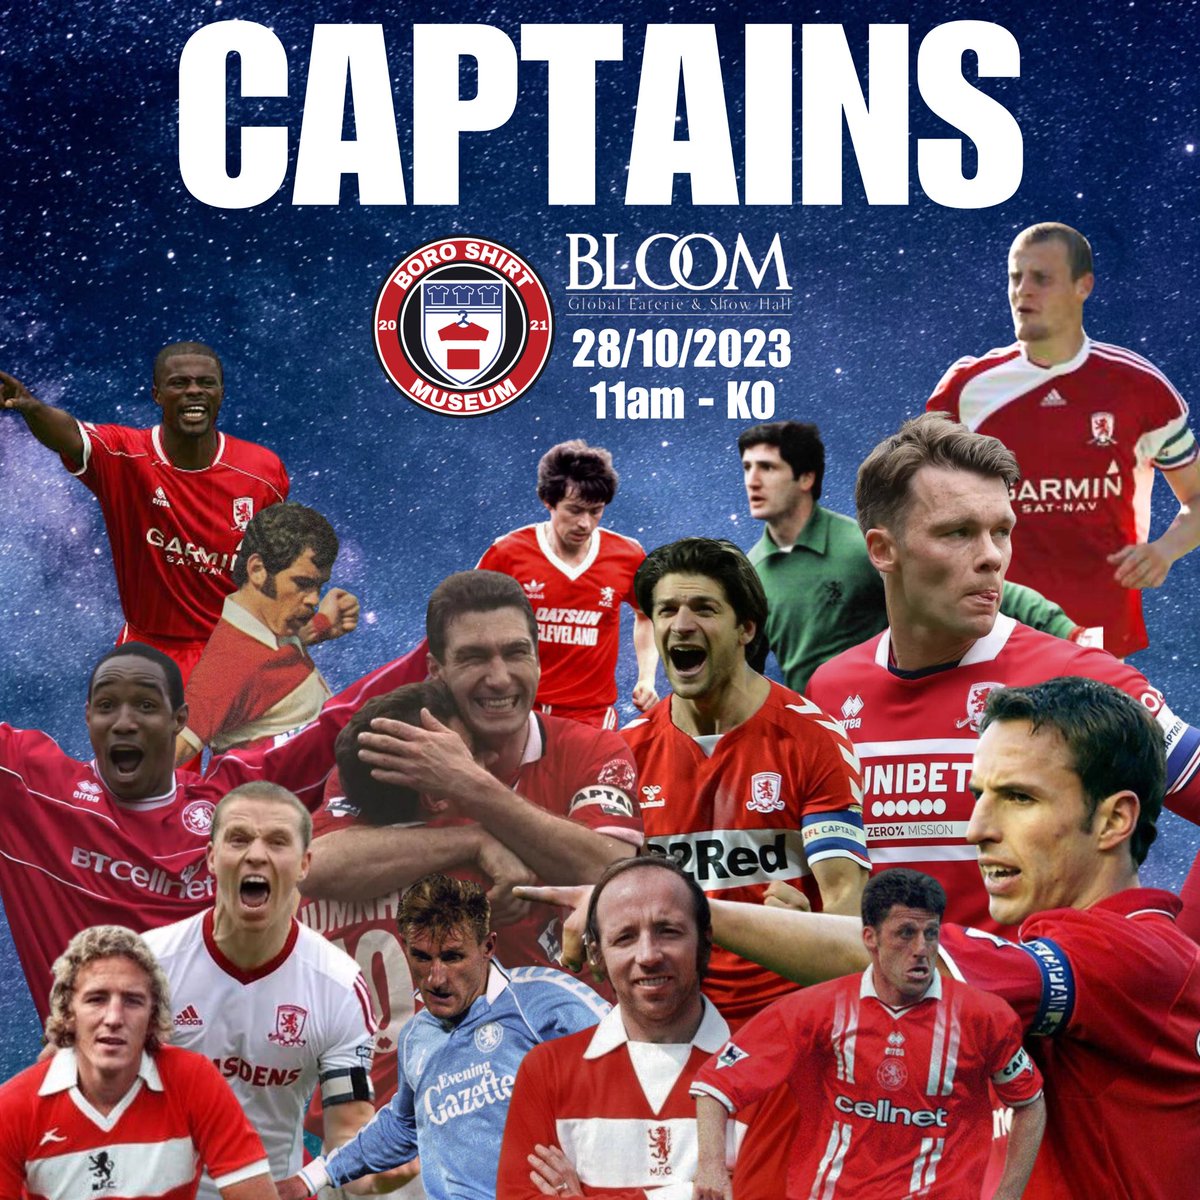 🚨 | CAPTAINS Our next EXHIBITION is this Saturday, 11am until just before kick off, at the beautiful @BloomTees. We’ll be going for a stroll down memory lane, and revisiting some of our greatest and most iconic captains from across the years. FREE ENTRY. UTB!